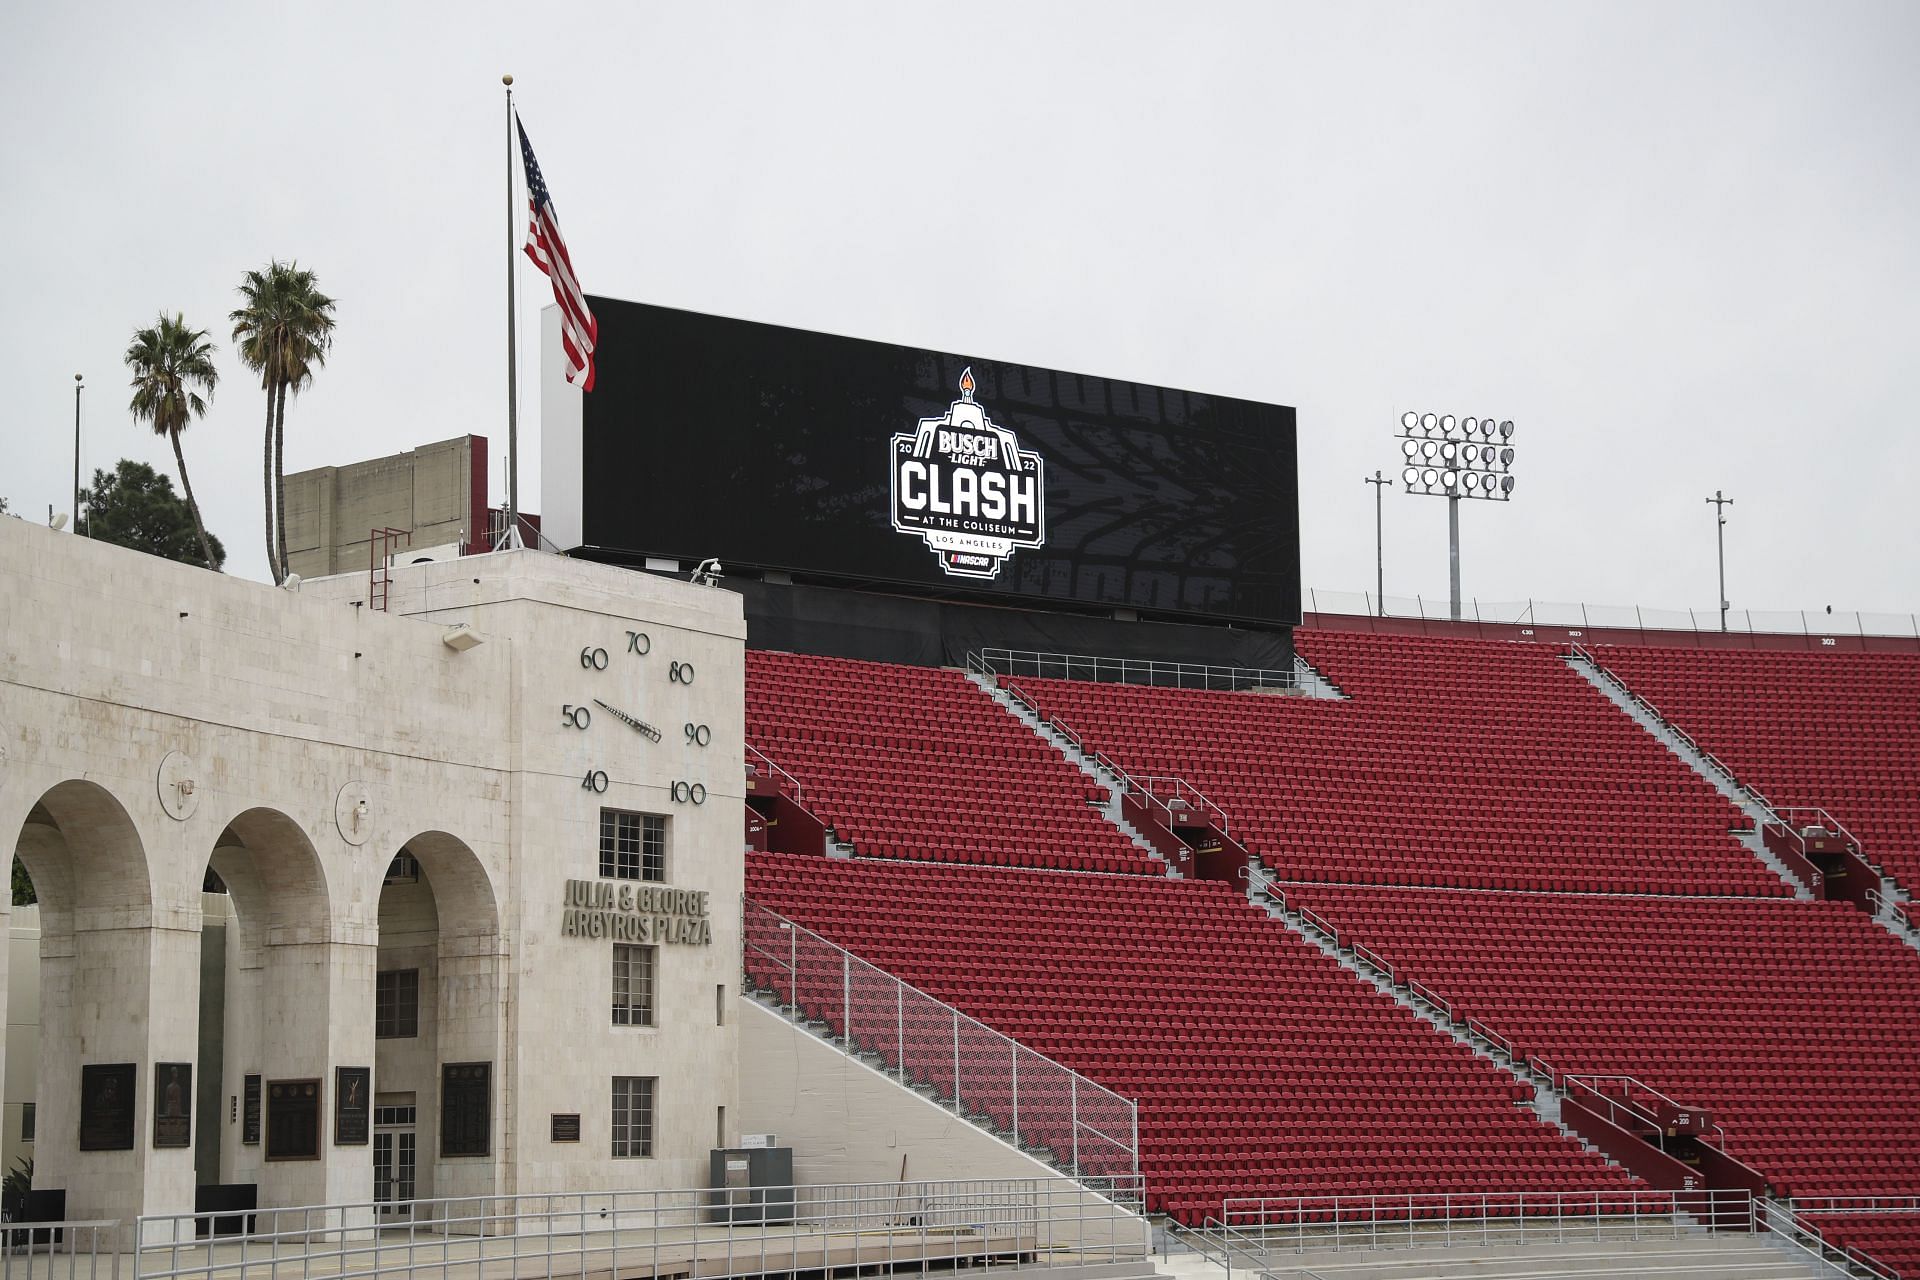 Clash at LA Coliseum with its seating